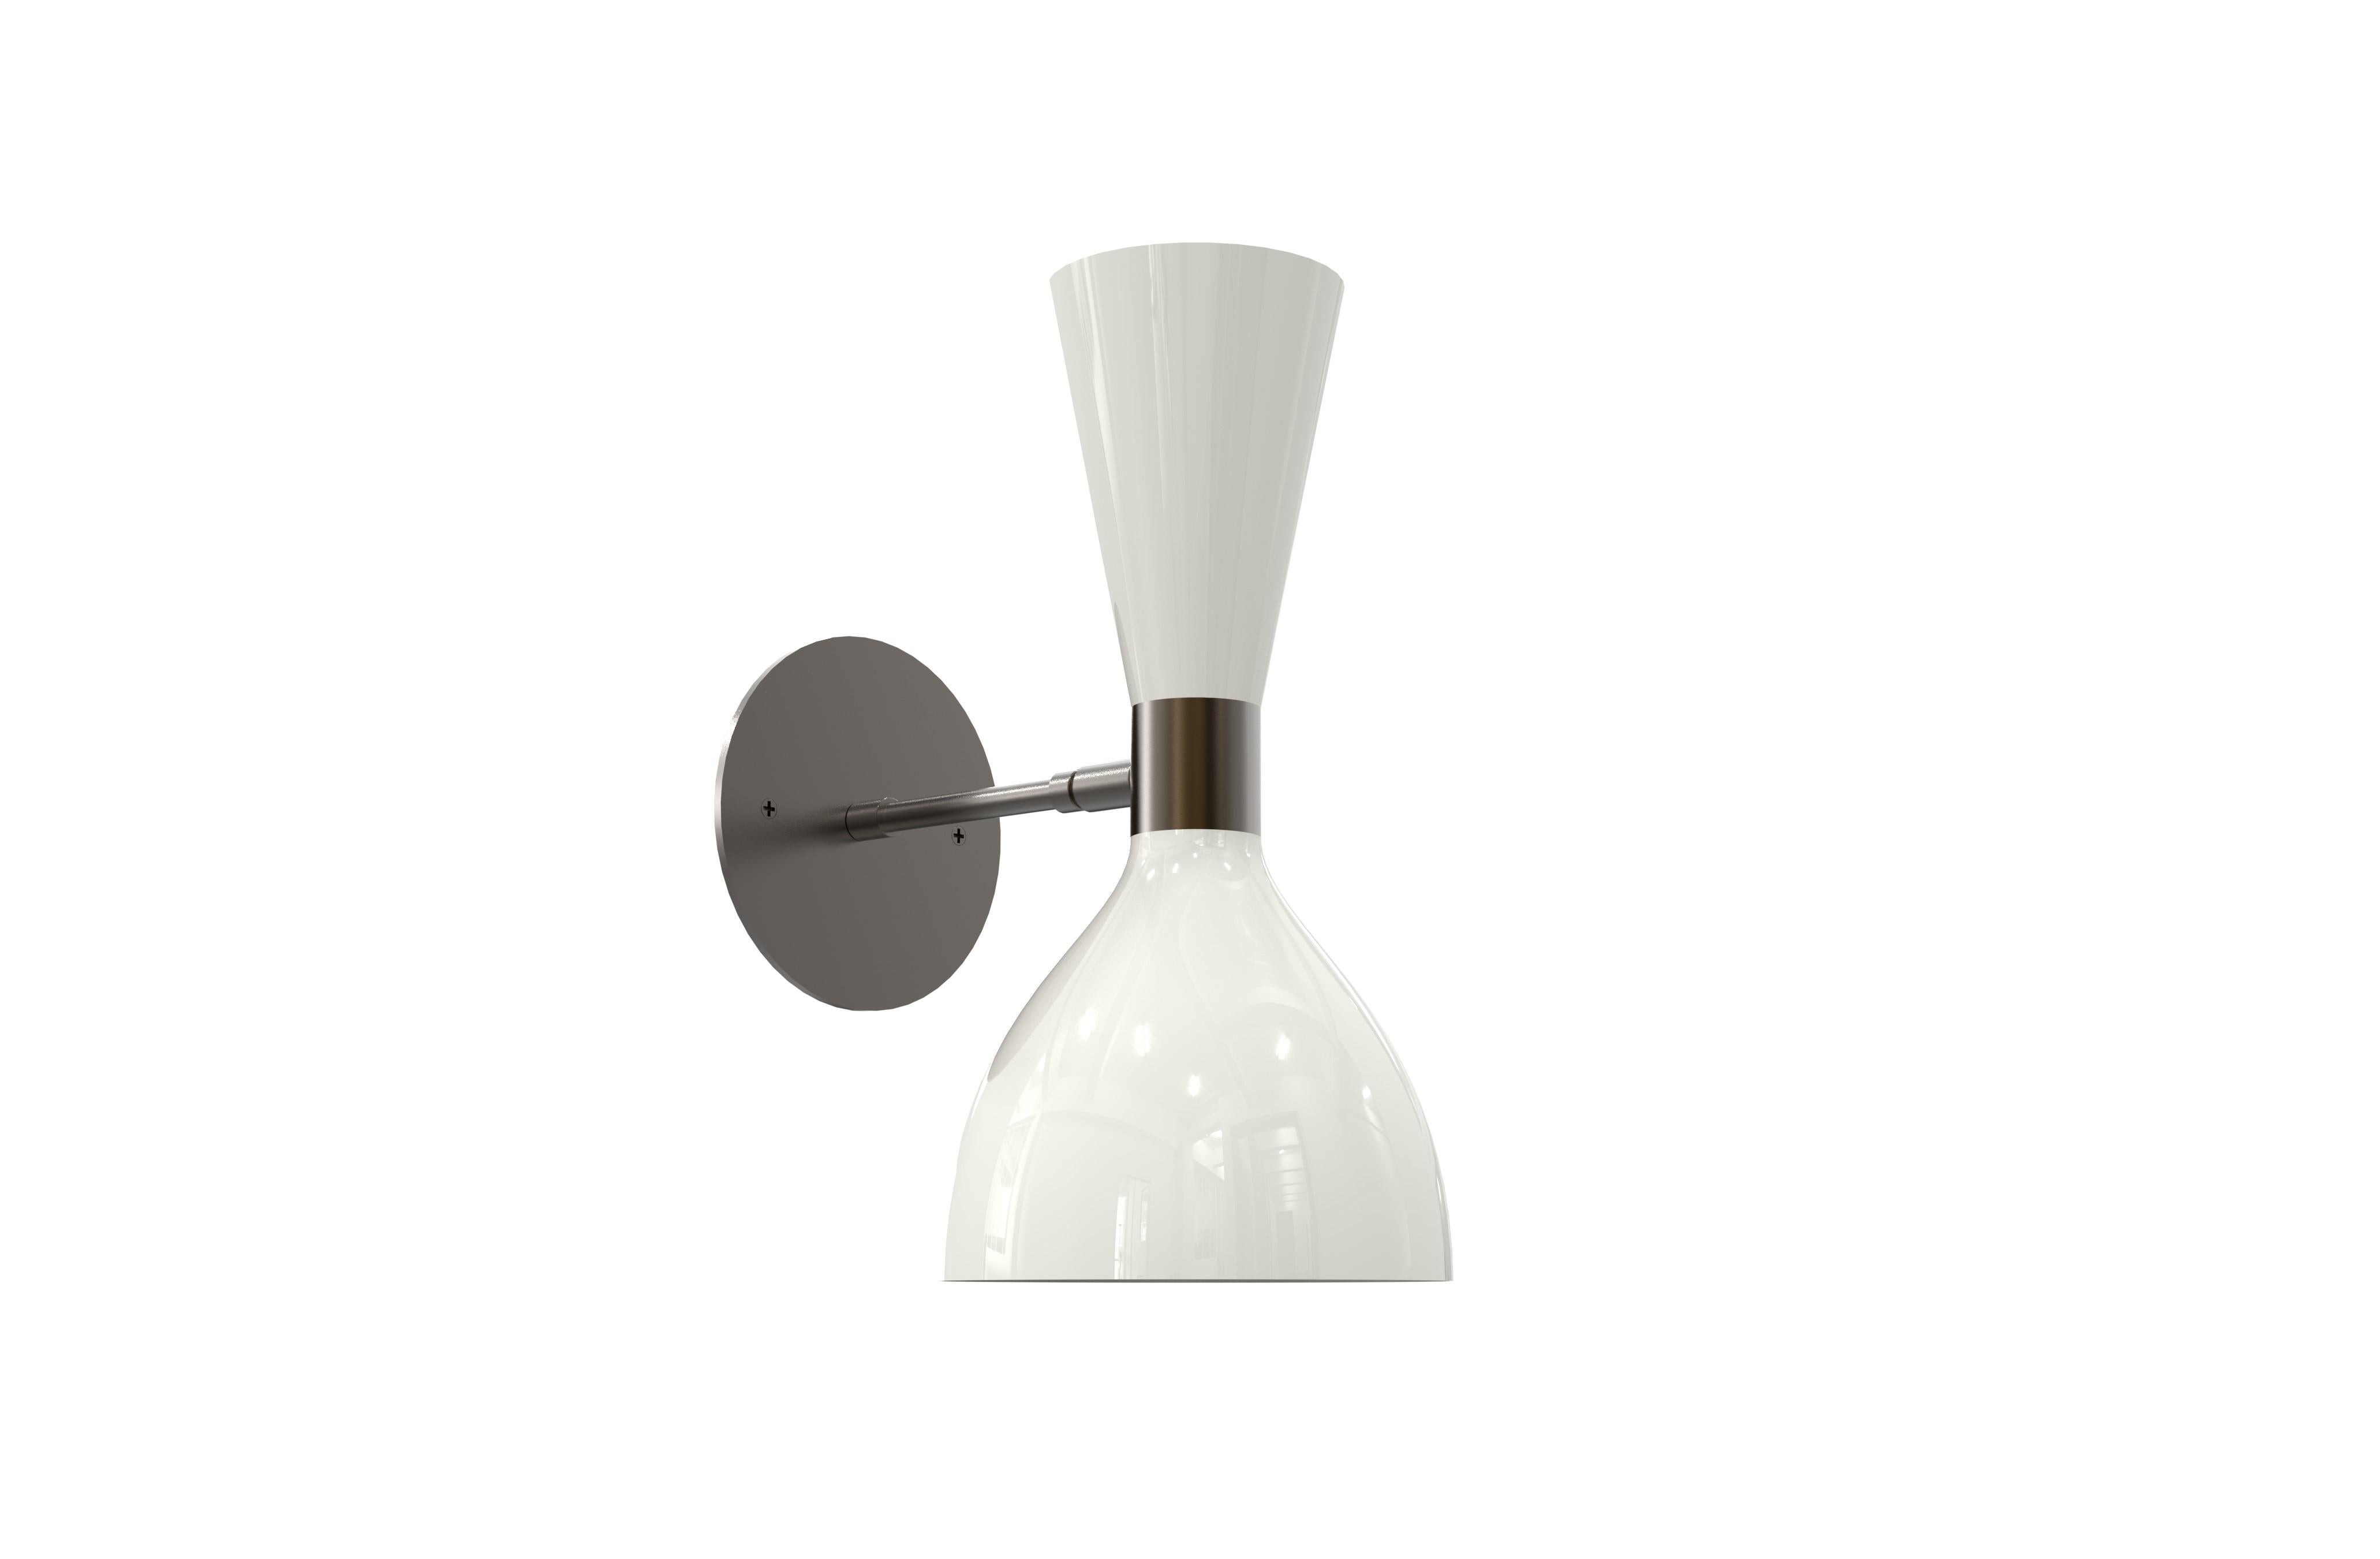 Our best-selling Ludo wall sconce or reading light, handmade by Blueprint Lighting. The spun aluminium cones are a vintage 1950s Italian design. Swiveling head allows for cone adjustment.  You may select from any of our 36 enamel colors and 6 metal